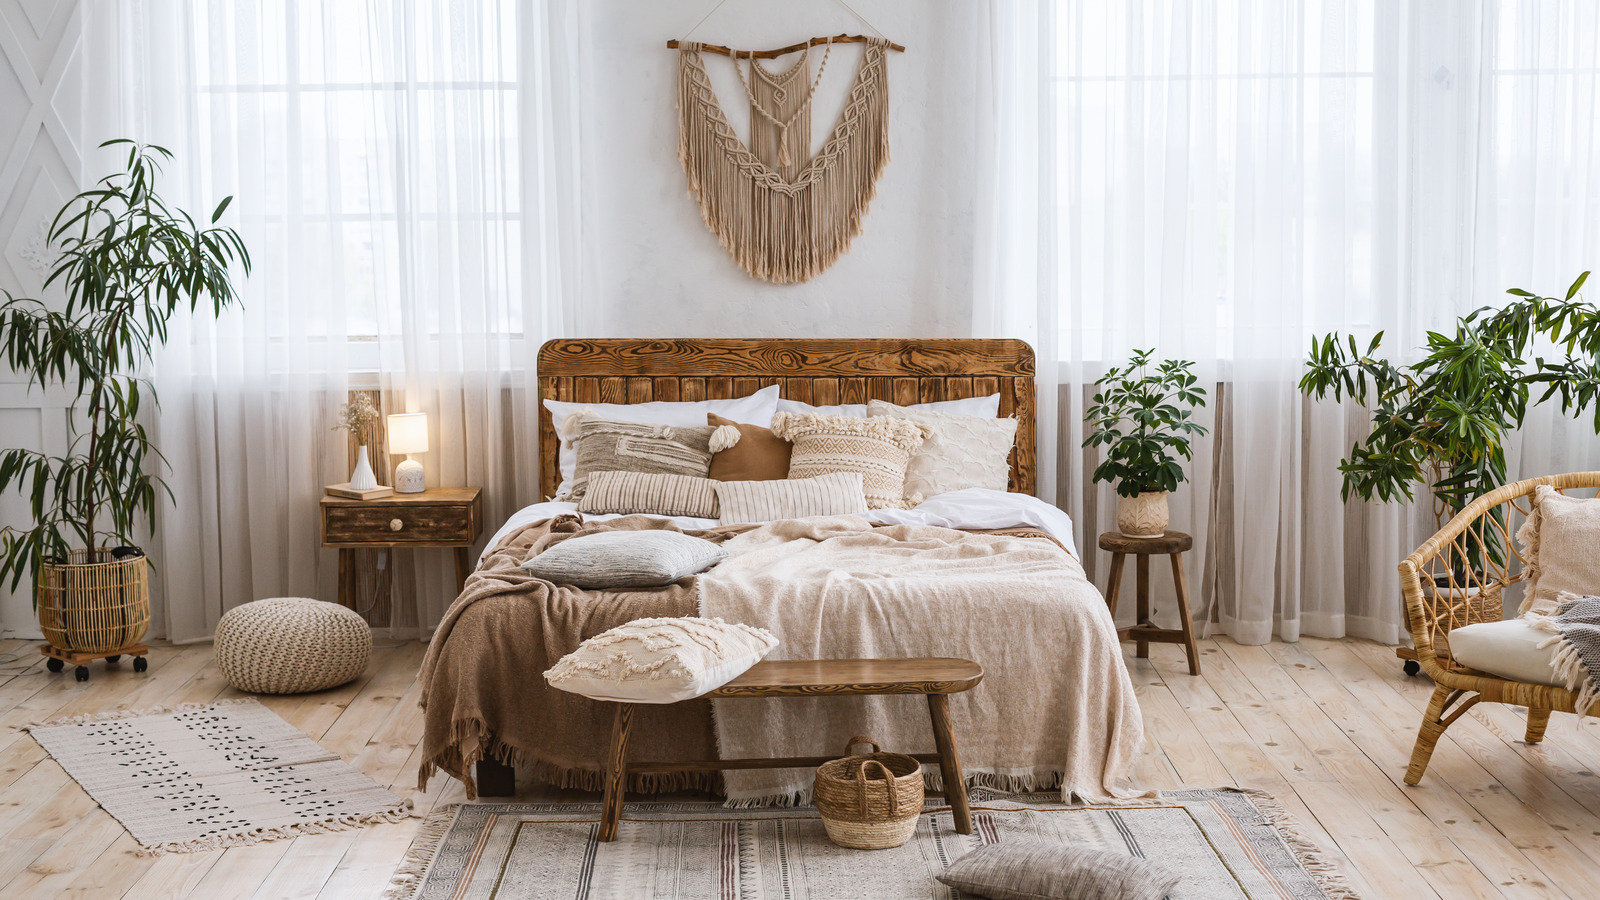 A Feng Shui Expert Explains How to Arrange a Bedroom That Is